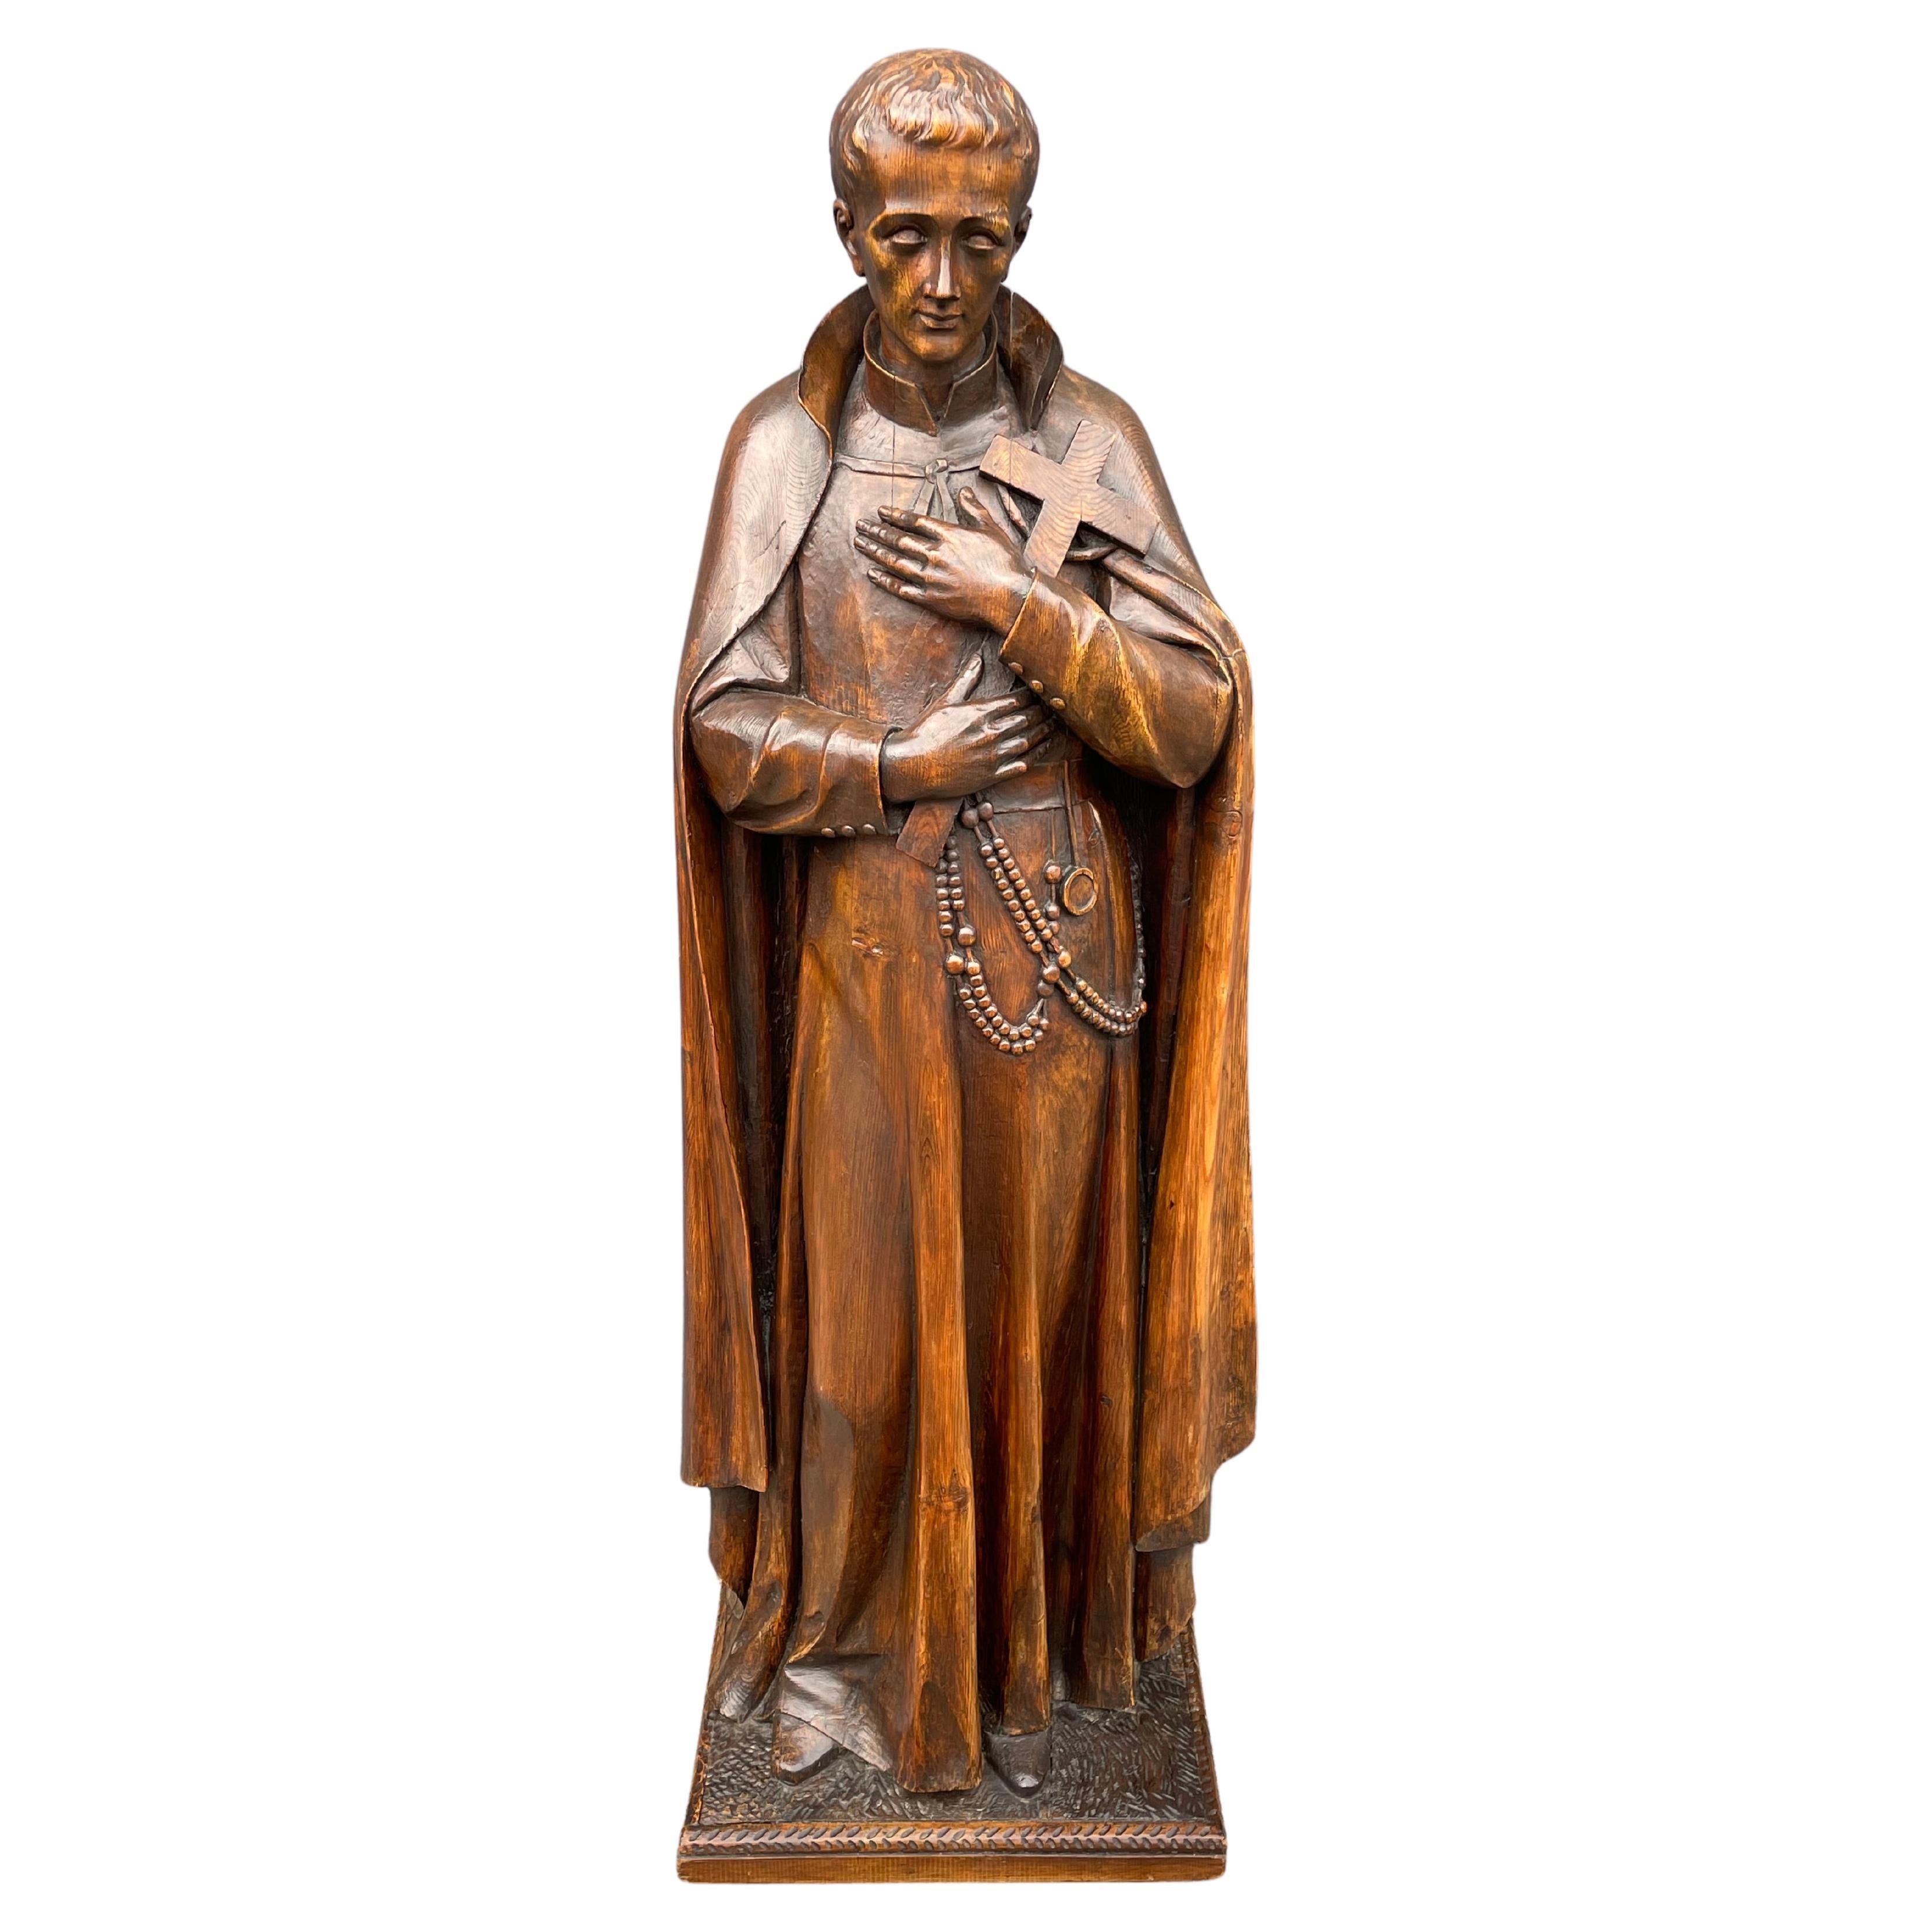 Large Antique Carved Wooden Church Sculpture, Lay Brother & Saint Gerard Majella For Sale